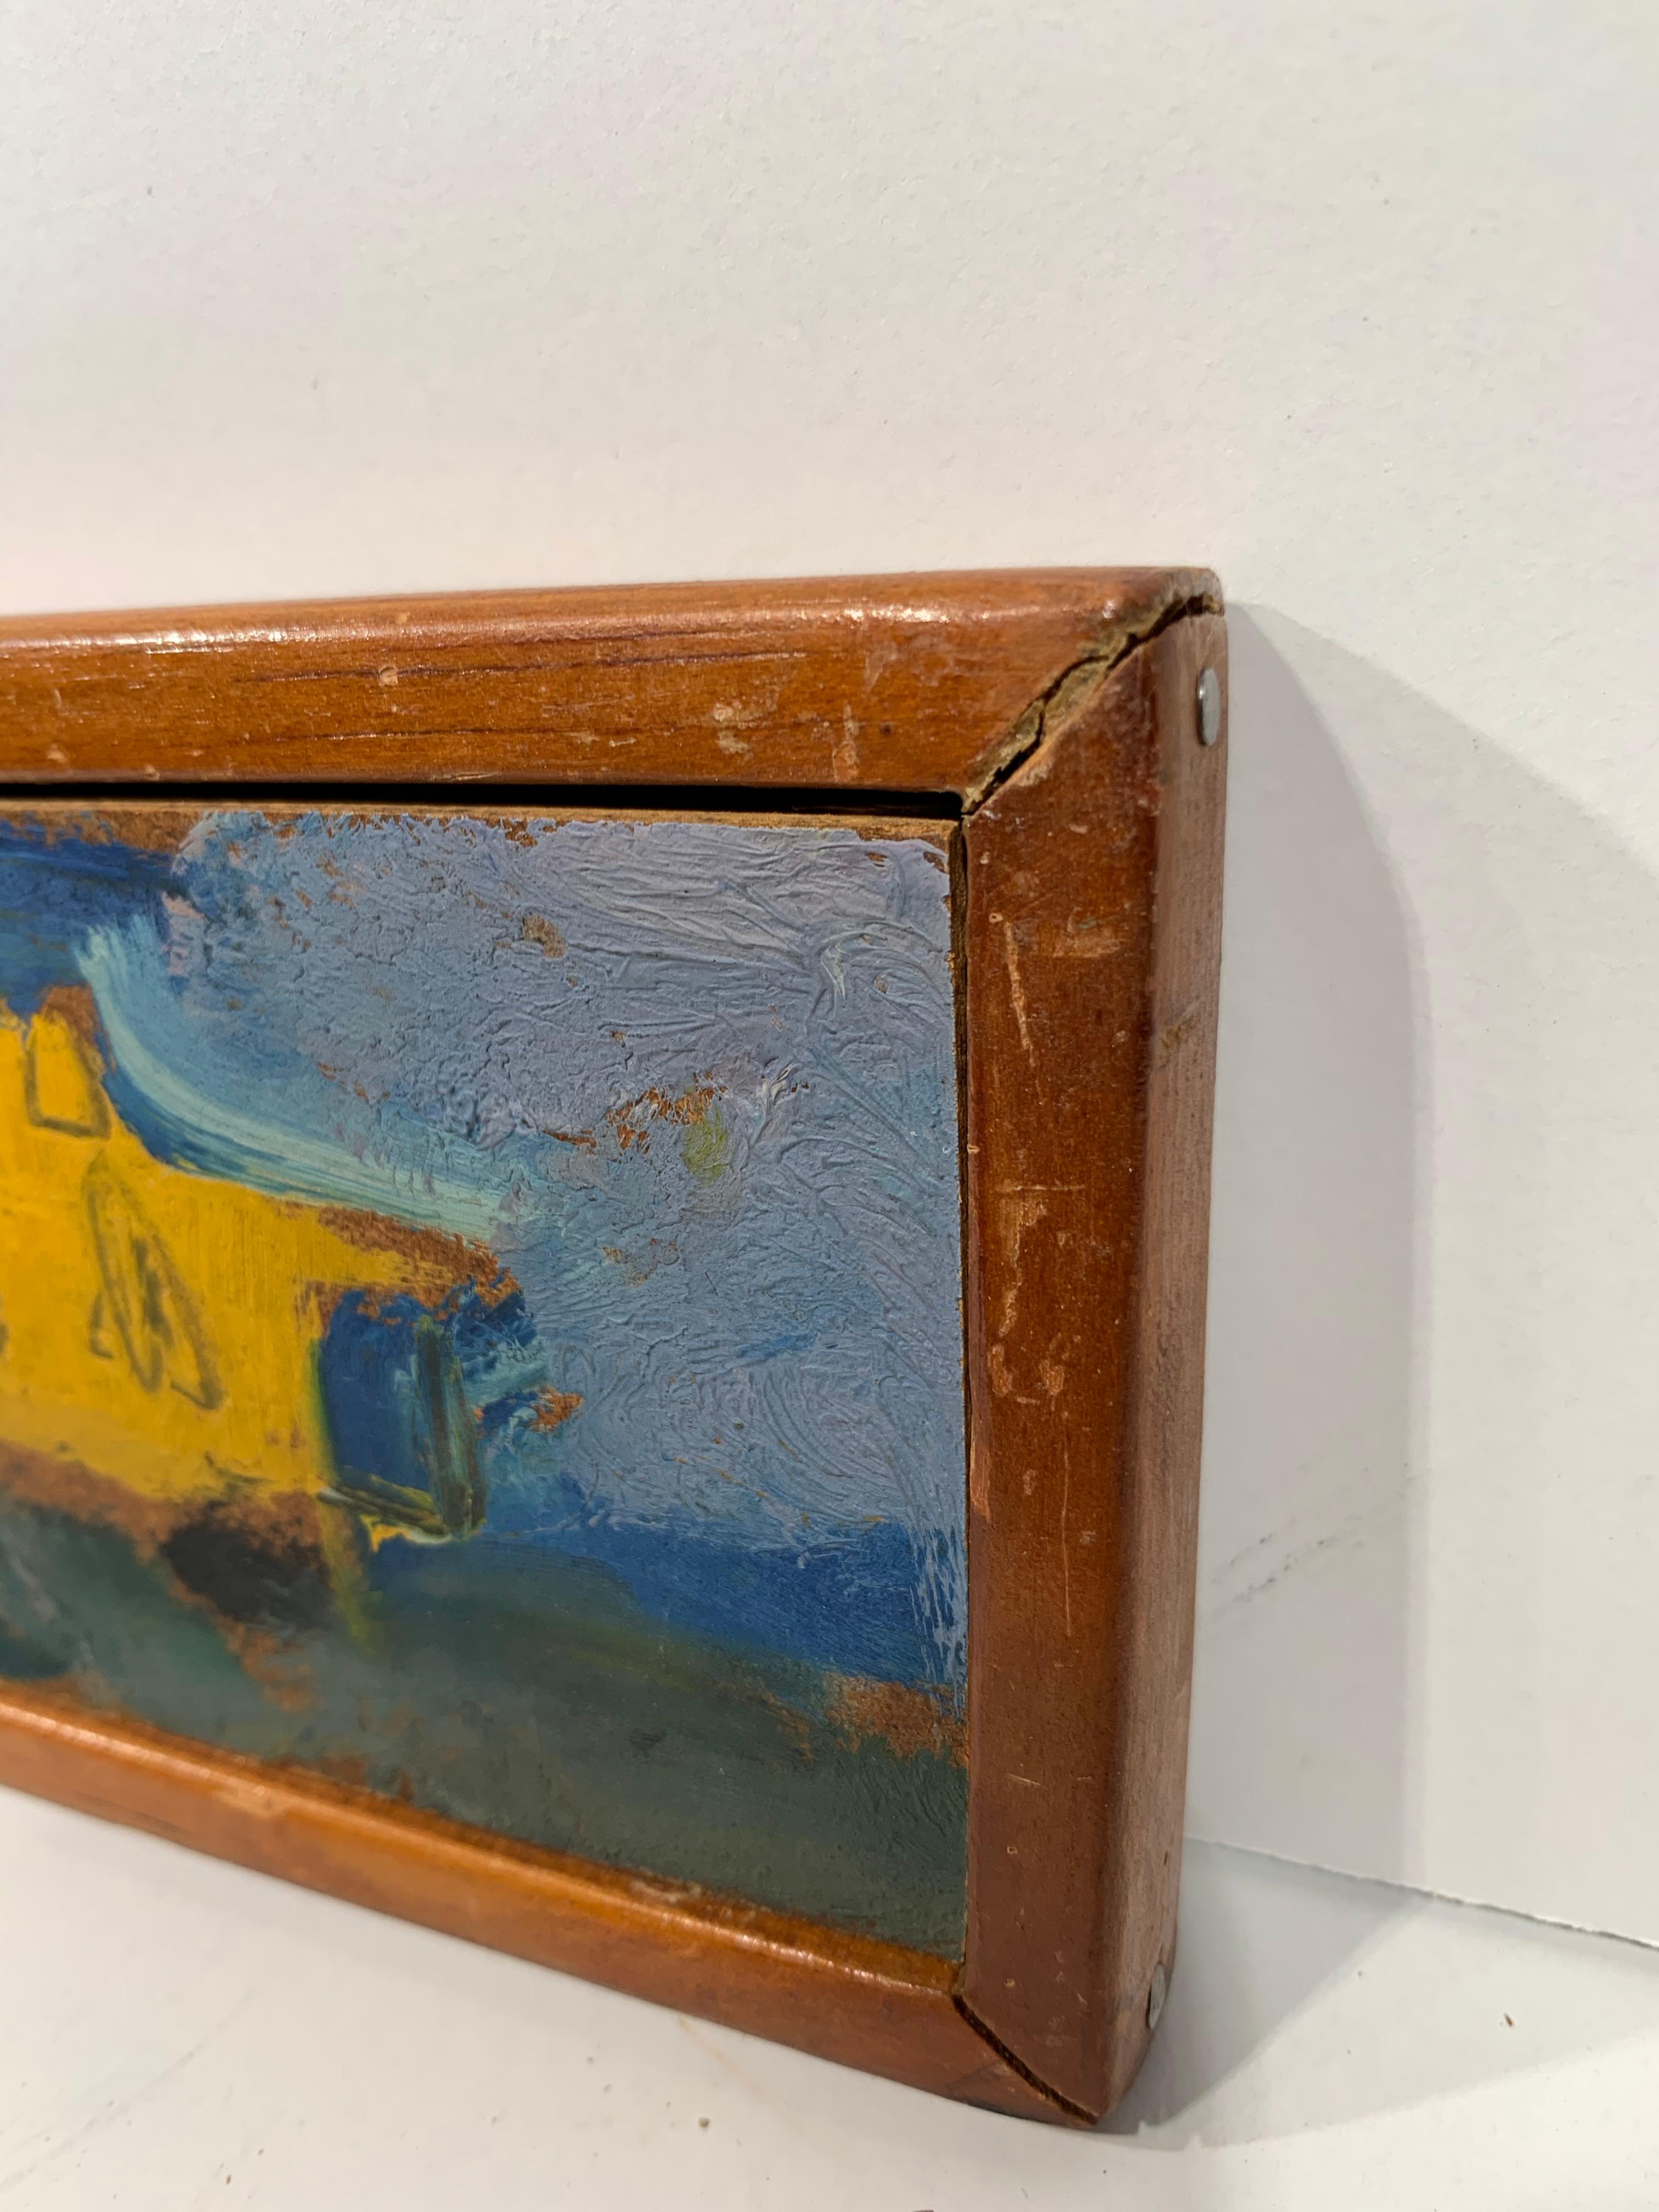 Sterling Strauser (1907-1995). Yellow Caboose #2, 1956. Oil on panel, 2.75 x 24  inches. Framed measurement: 3.25 x 24.5 inches. Signed and dated upper center. Titled on verso. Excellent condition with no damage or conservation.

Image depicts